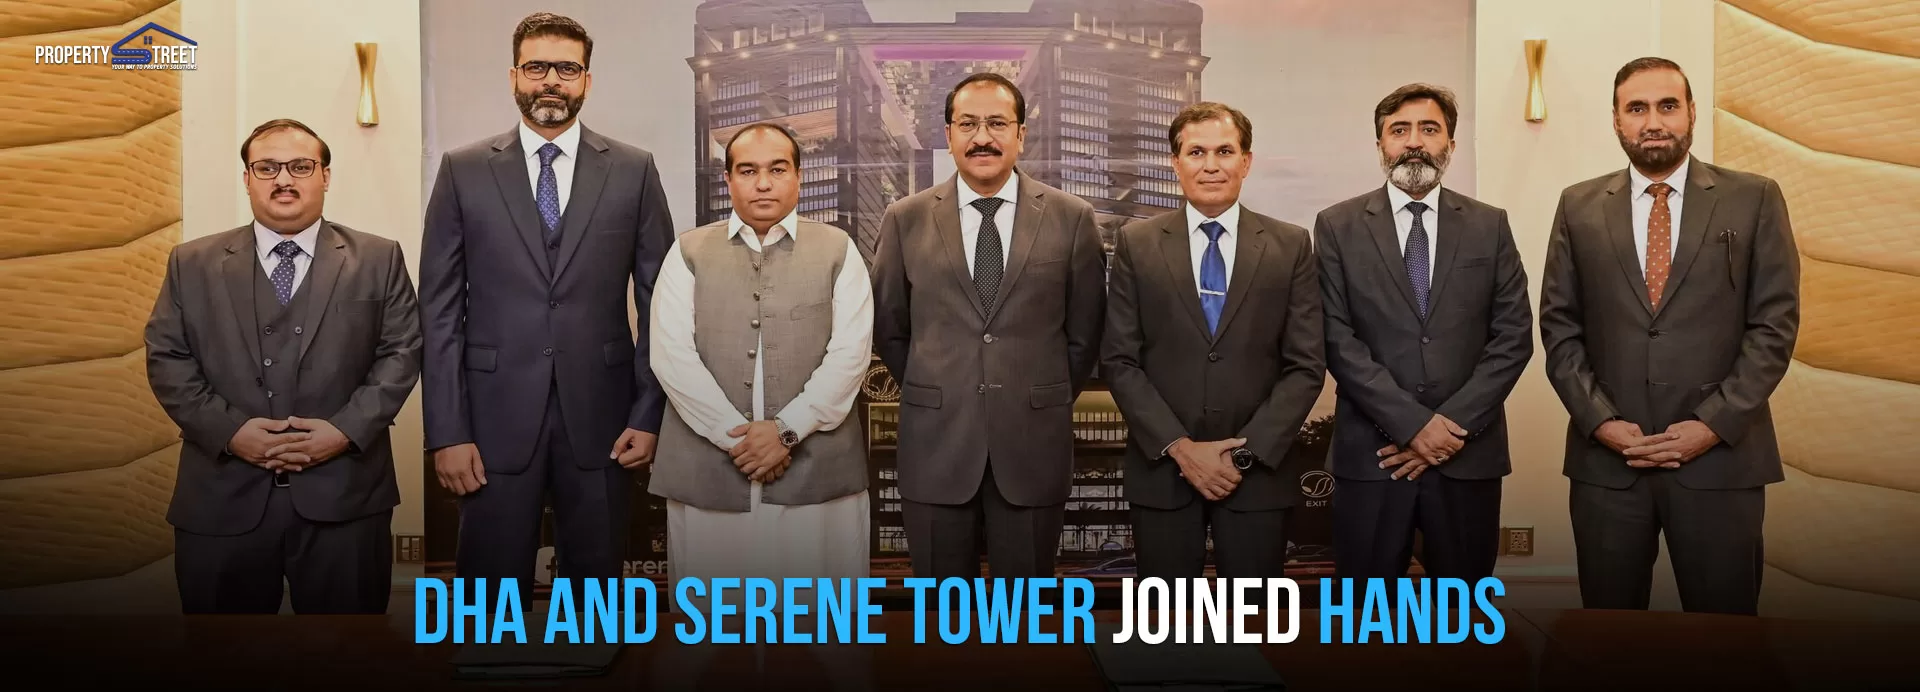 DHA and Serene Tower Joined Hands